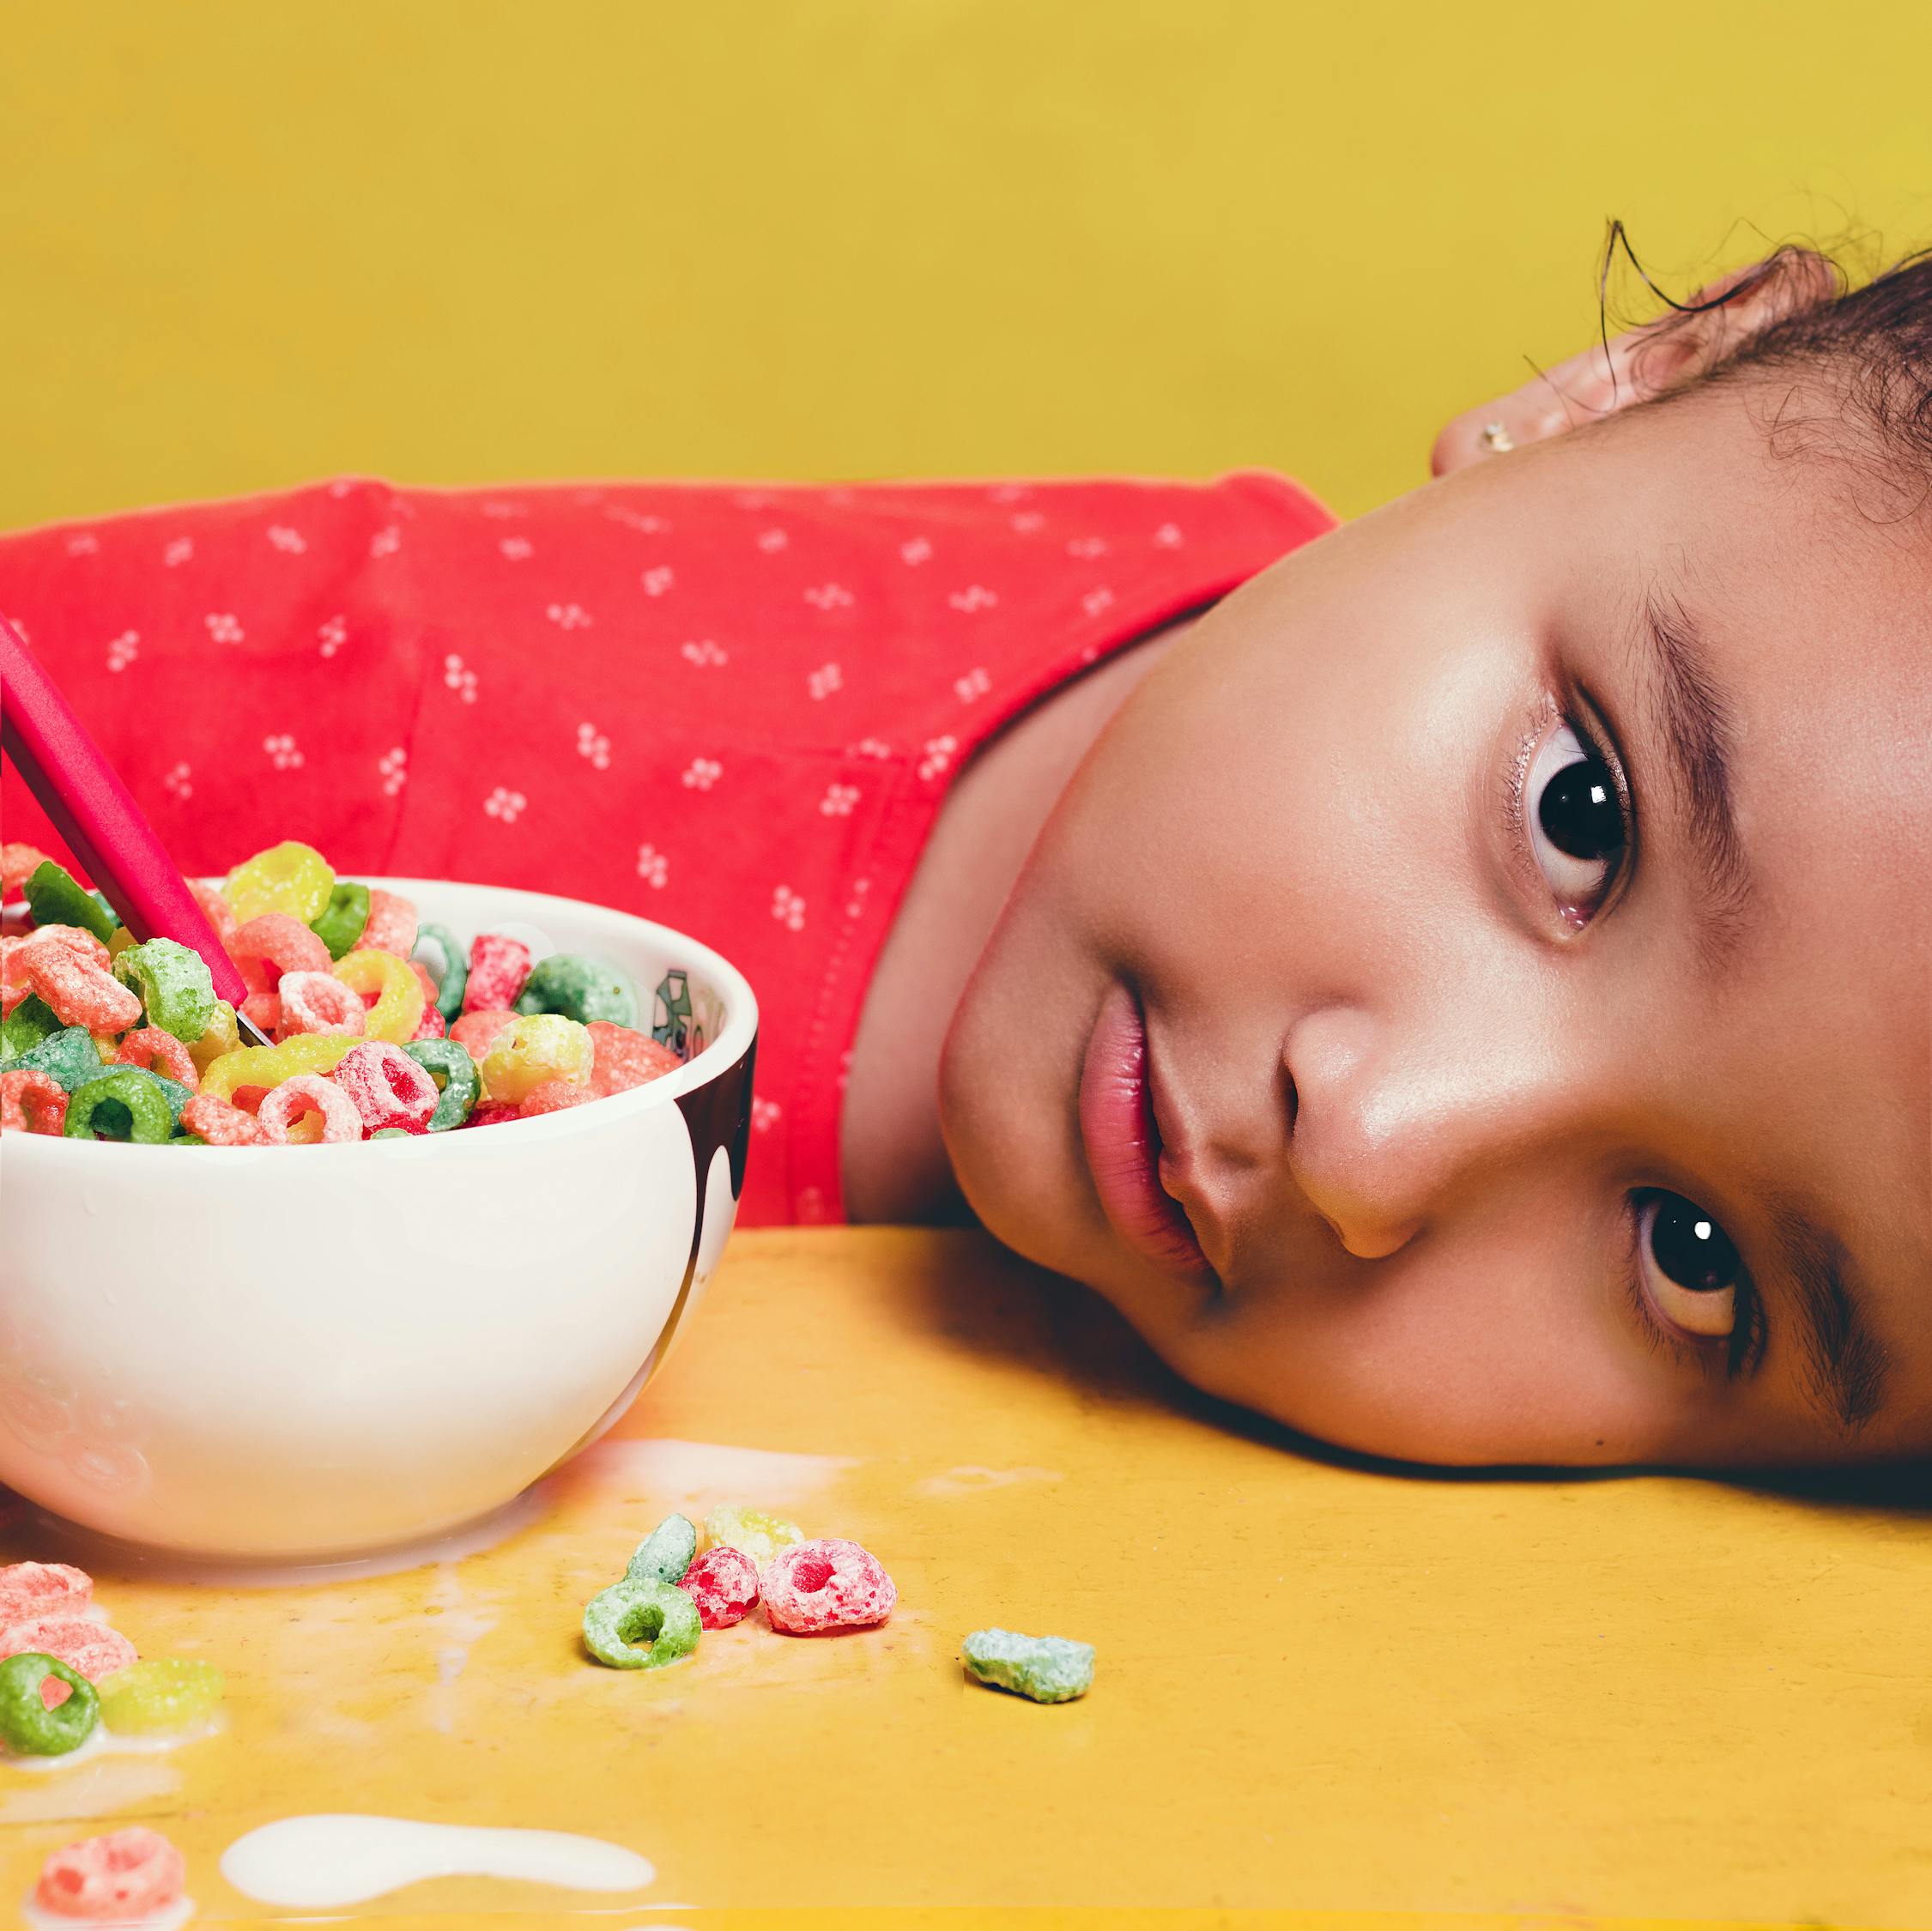 Girl Wearing Red Shirt Lying on table Beside White Bowl With Cereal